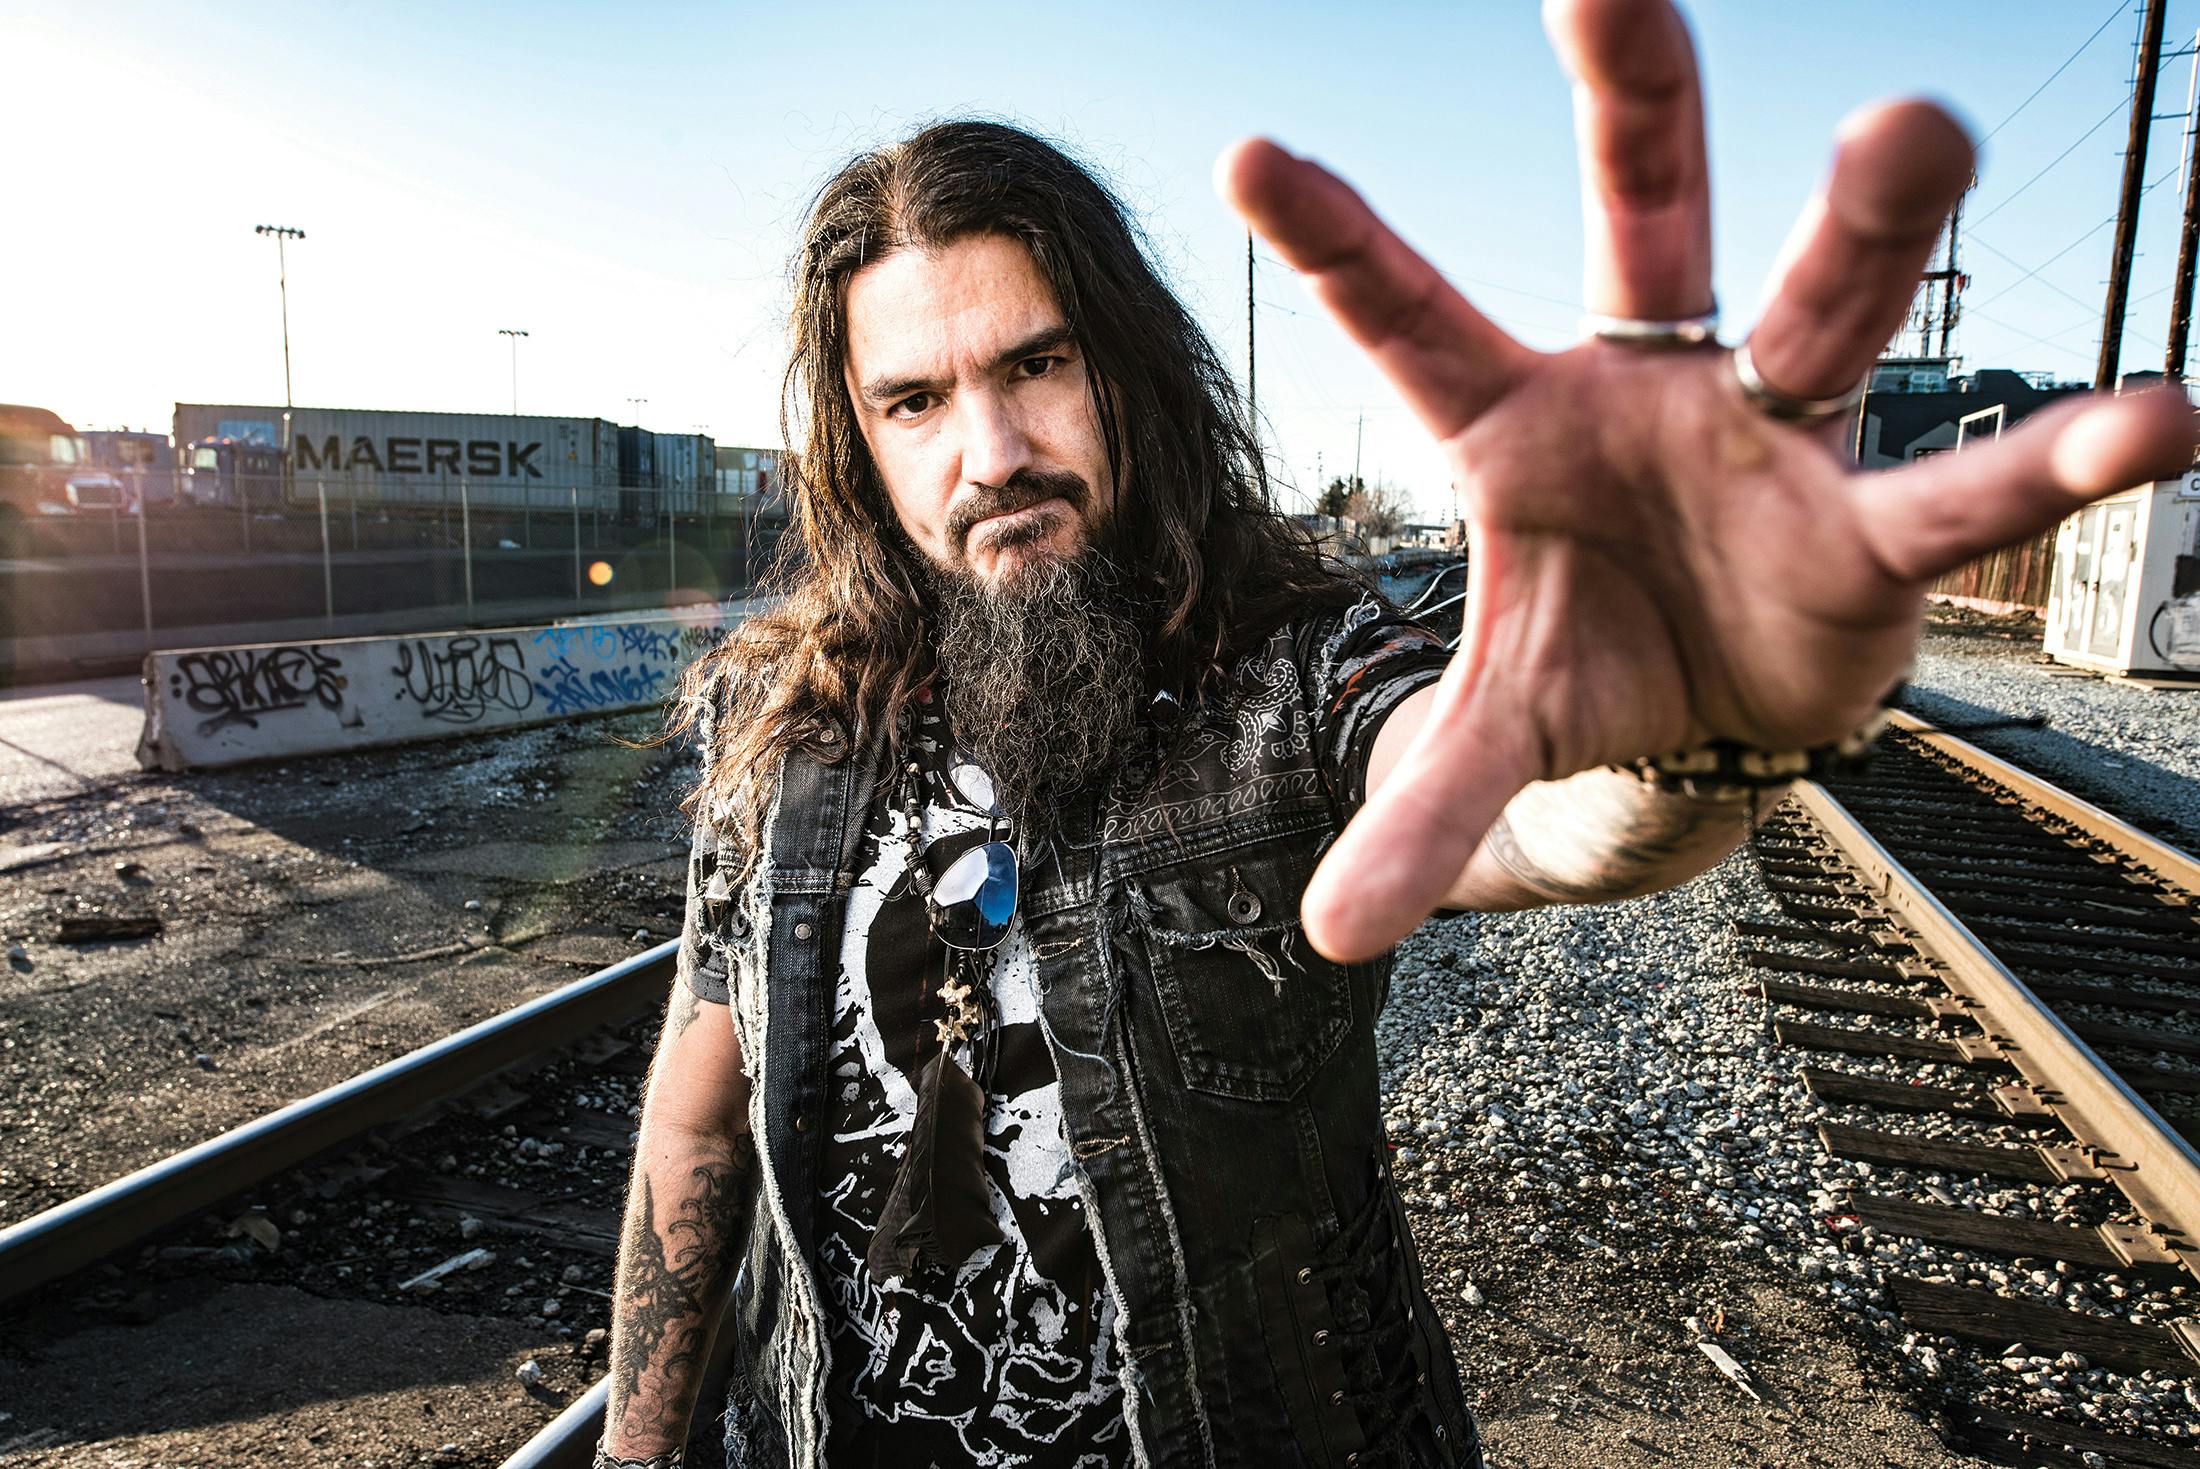 Robb Flynn Posts Rant Accusing "Bitchass Internet Trolls" Of "Menstruating" Over Machine Head's New Song